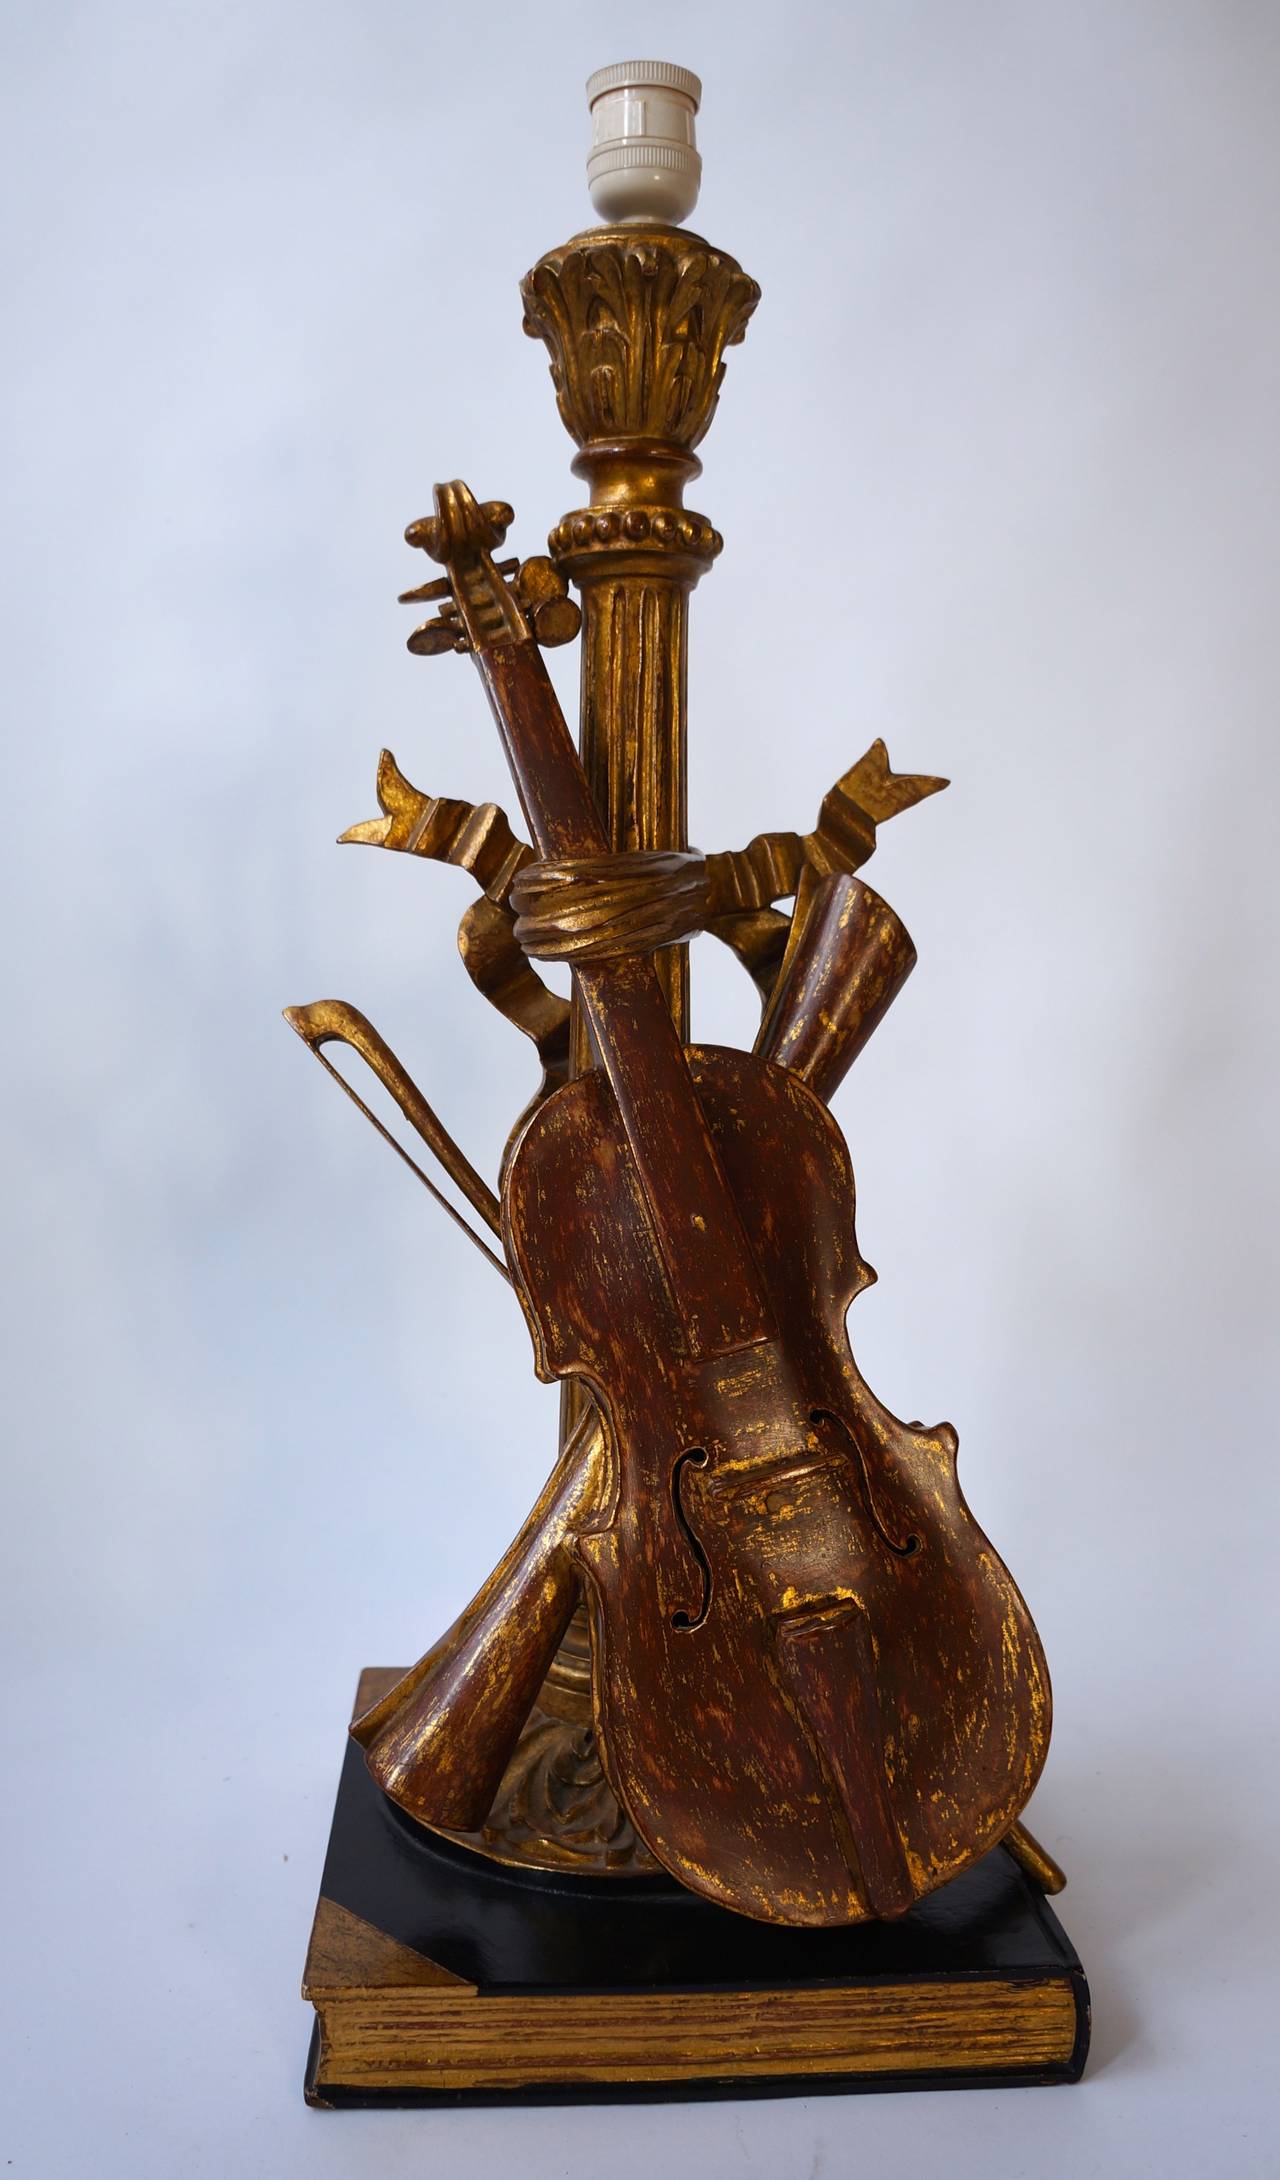 Antique carved violin table lamp.
A very charming antique table lamp with carved bases and column center, adorned with carved wooden violin, bow and scrolled music. Painted, brown and gold. Very good condition.